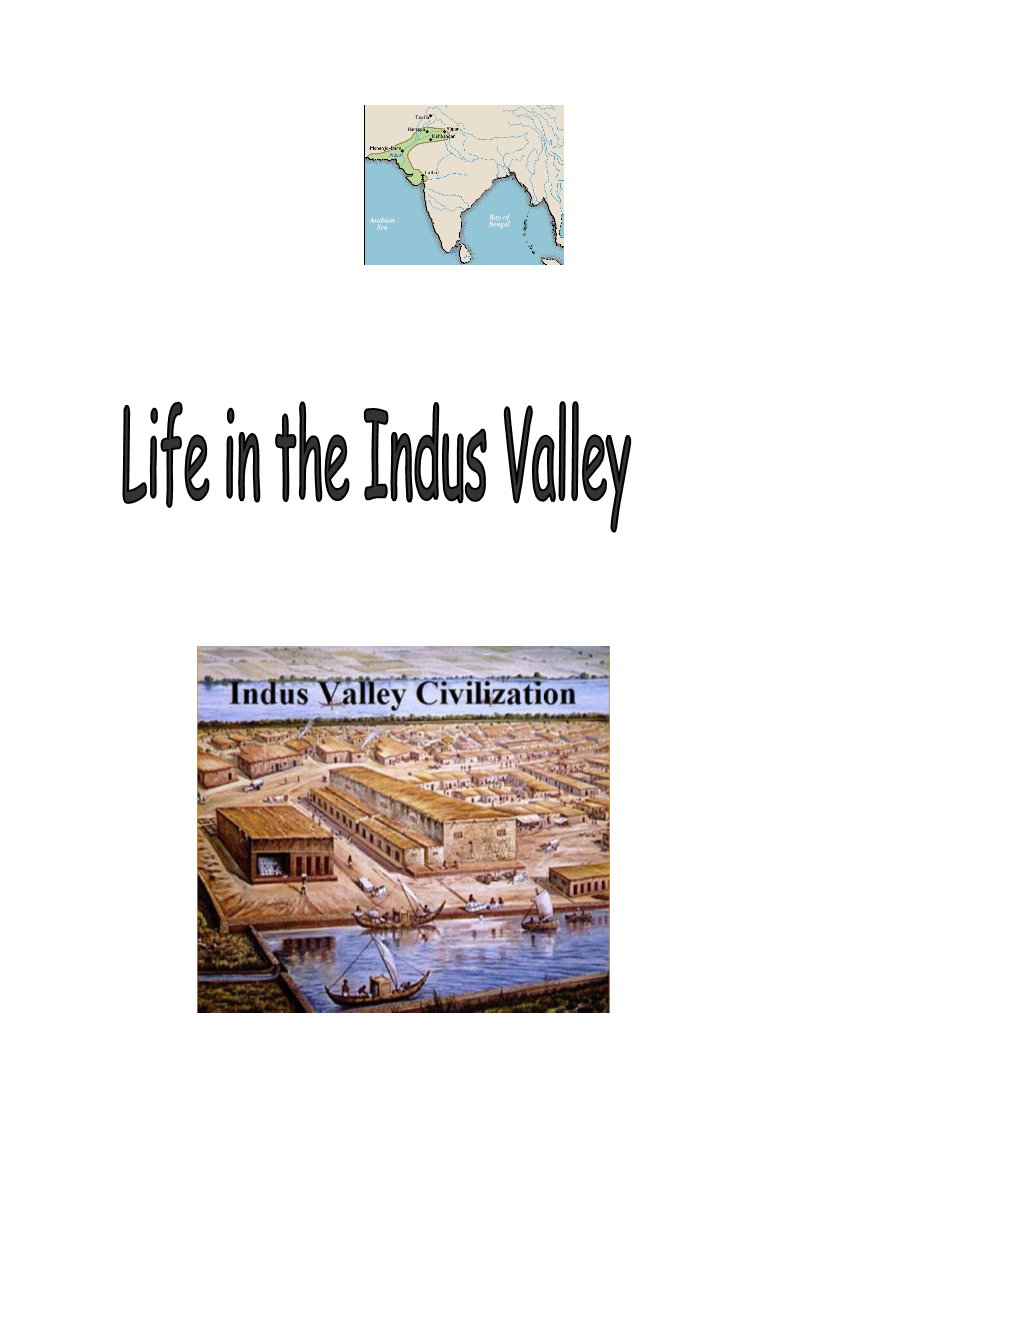 Life in the Indus Valley by Joyce and David Mollet